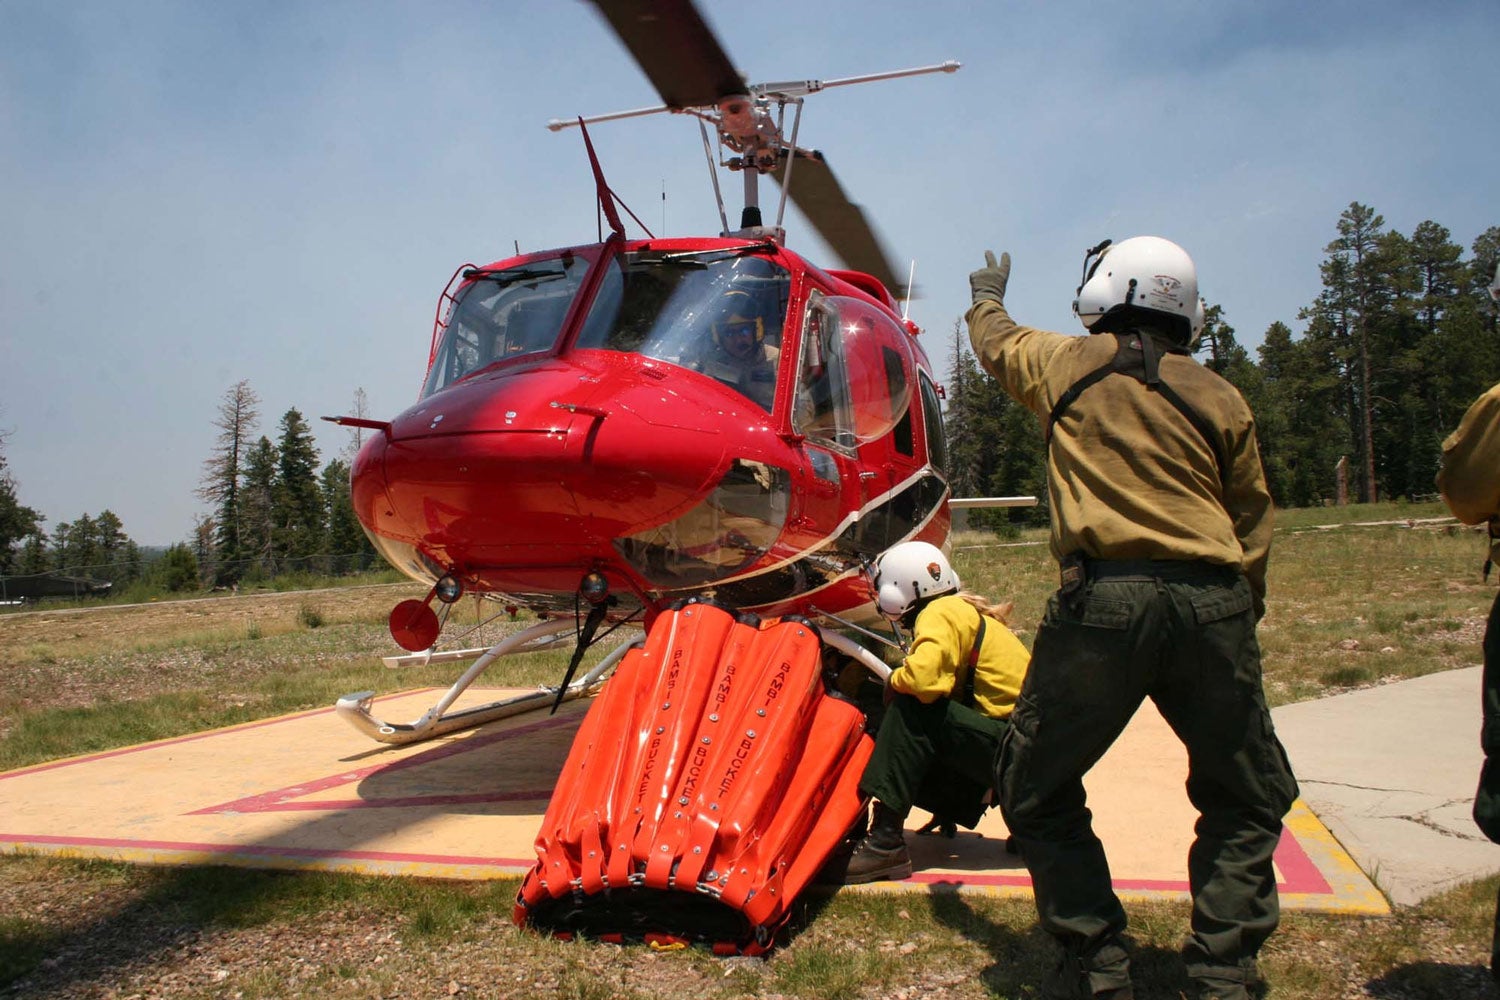 How to Become an Aerial Firefighter Pilot